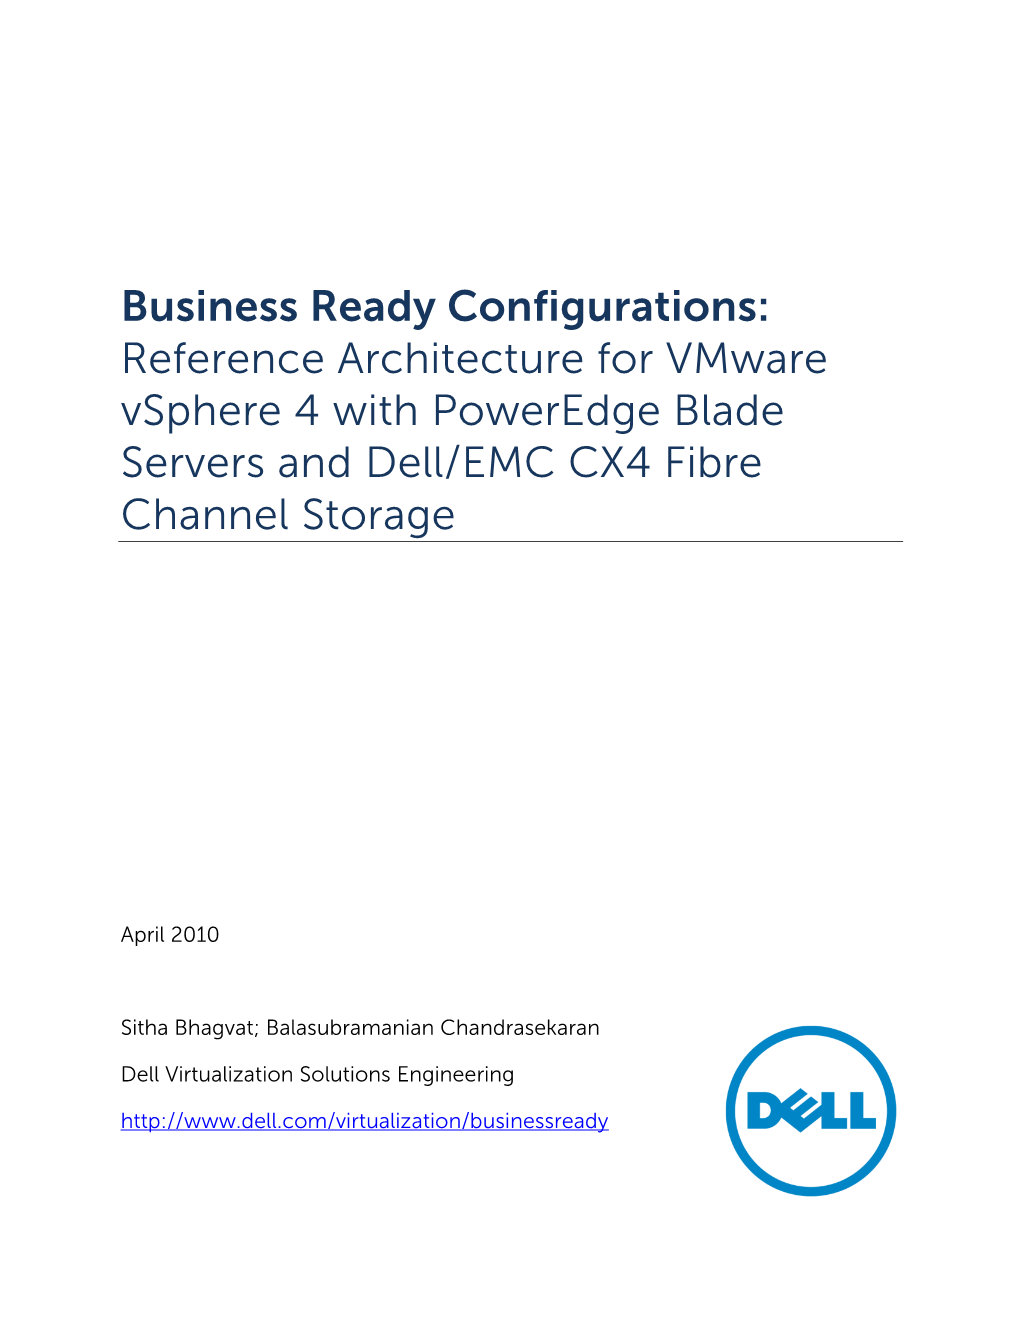 Business Ready Configurations: Reference Architecture for Vmware Vsphere 4 with Poweredge Blade Servers and Dell/EMC CX4 Fibre Channel Storage